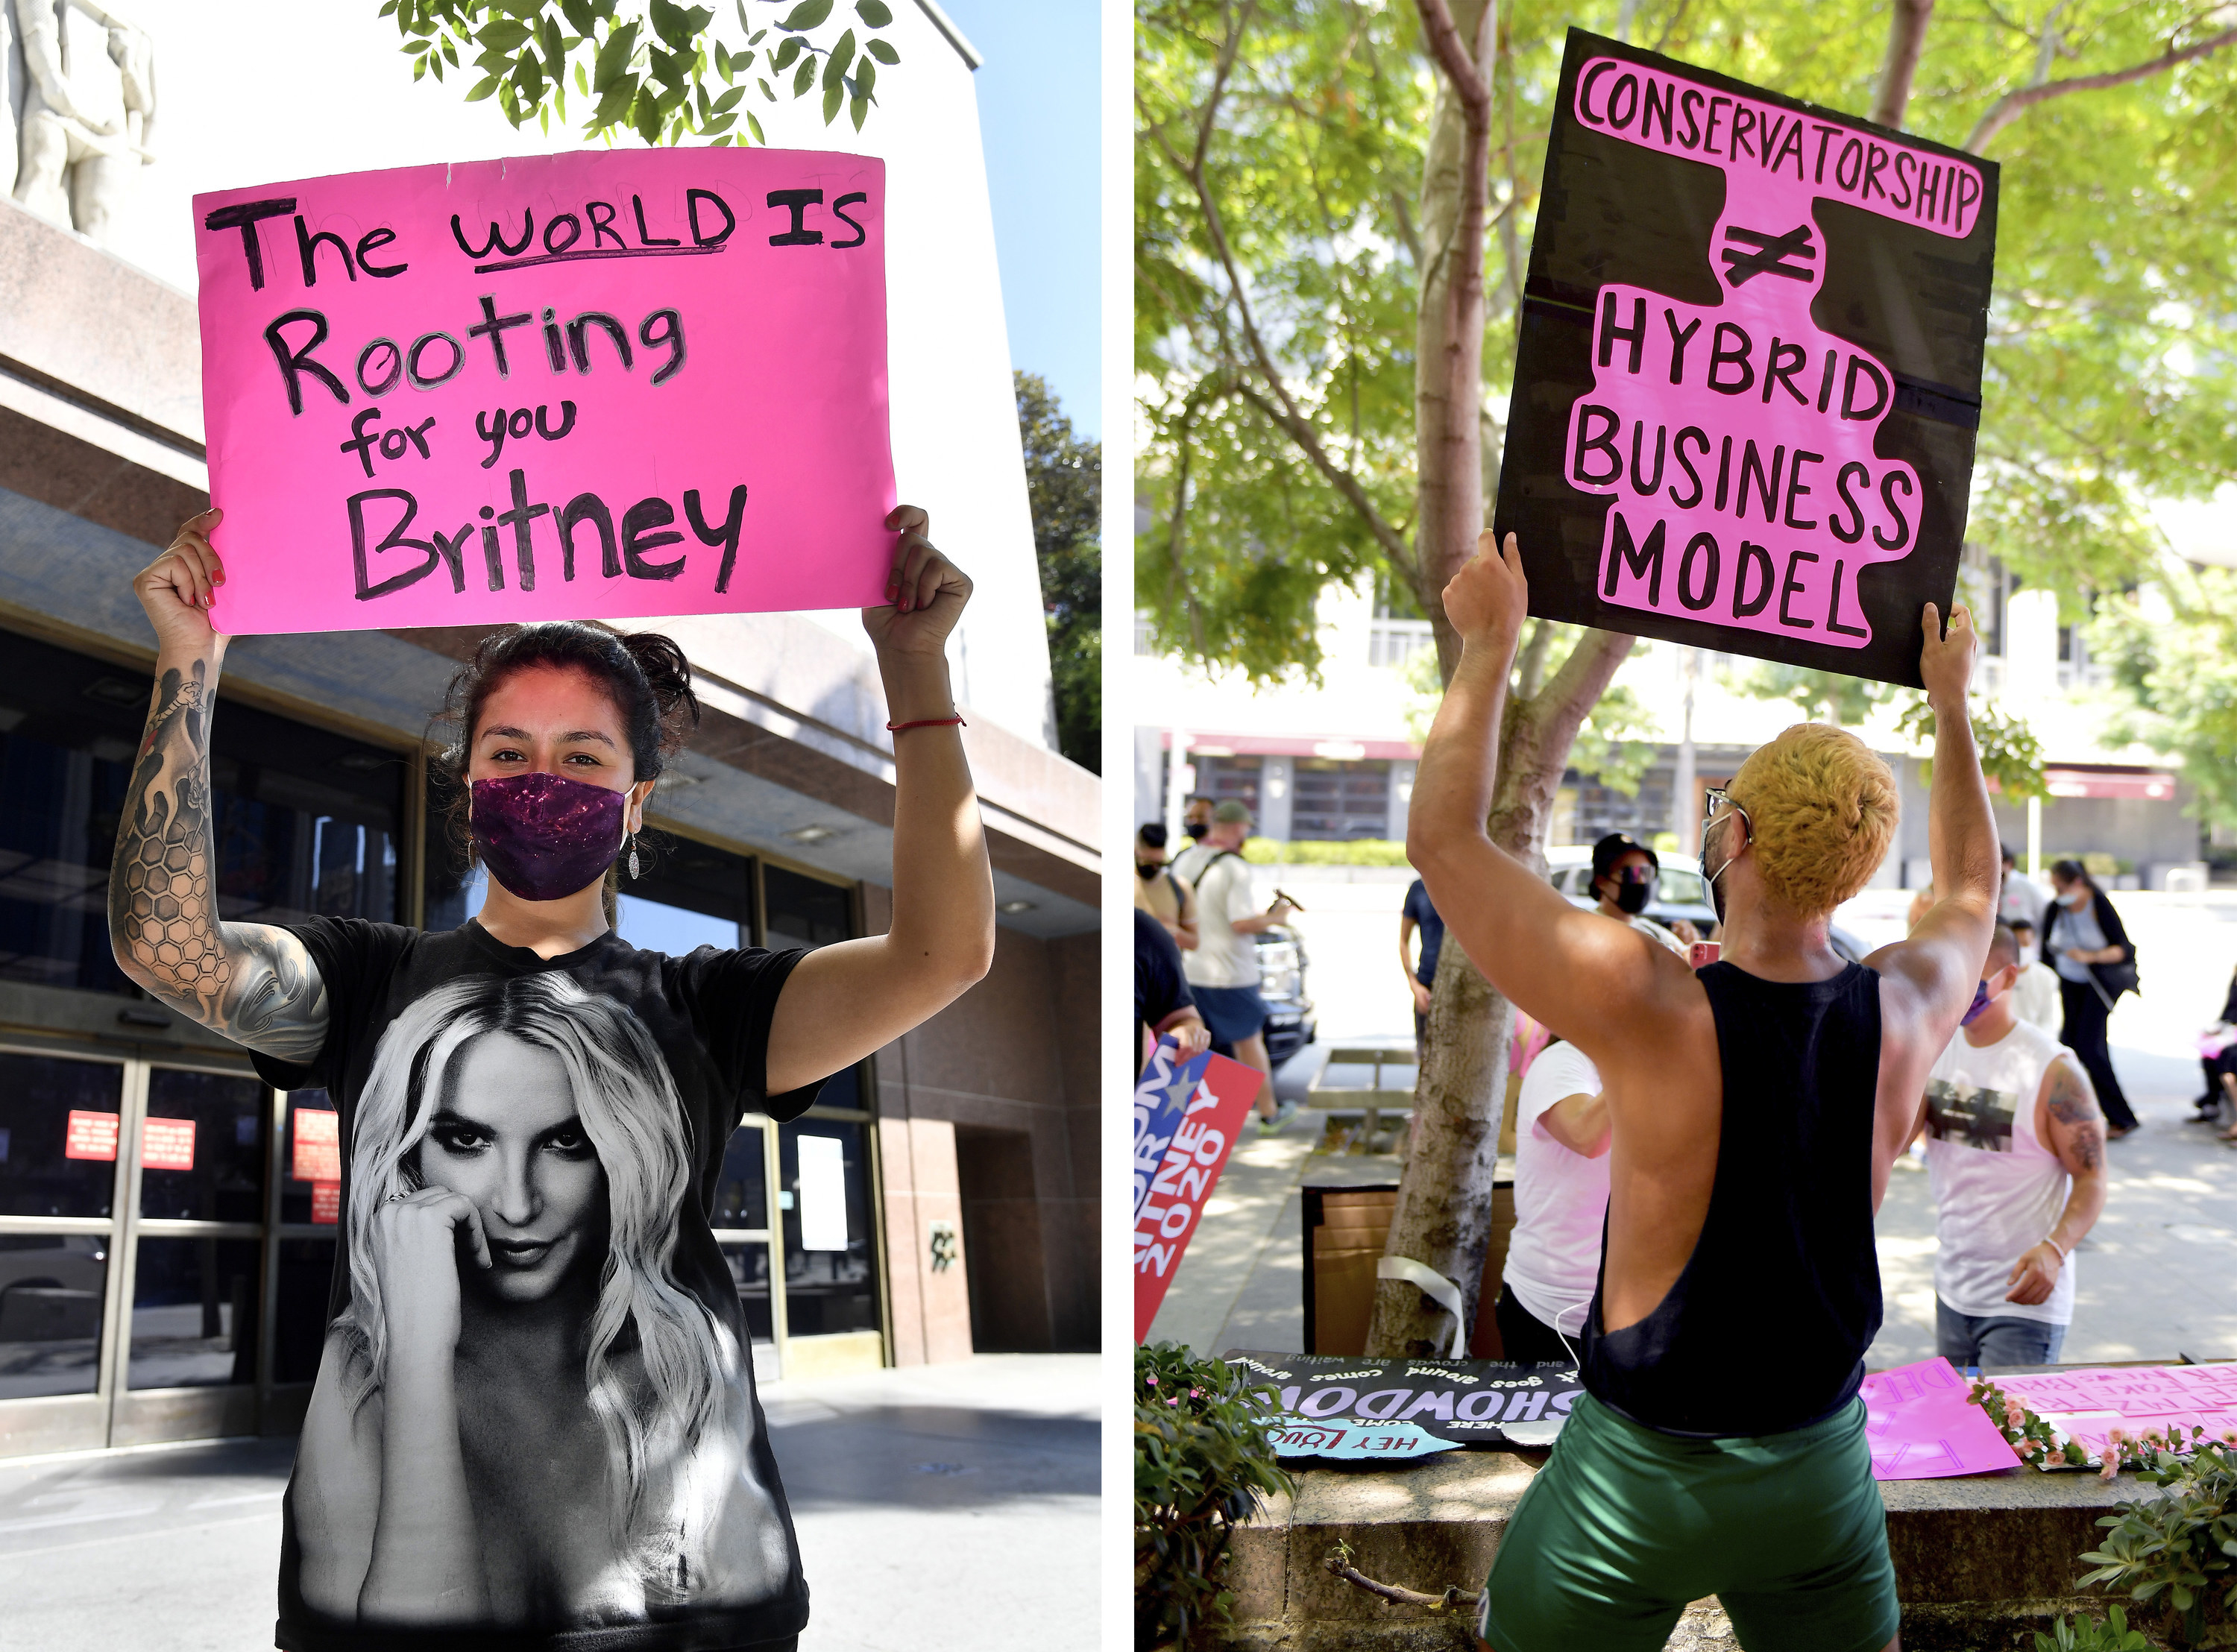 Protesters hold signs that read &quot;the world is rooting for you, britney&quot; and &quot;conservatorship ≠ hybrid business model&quot;